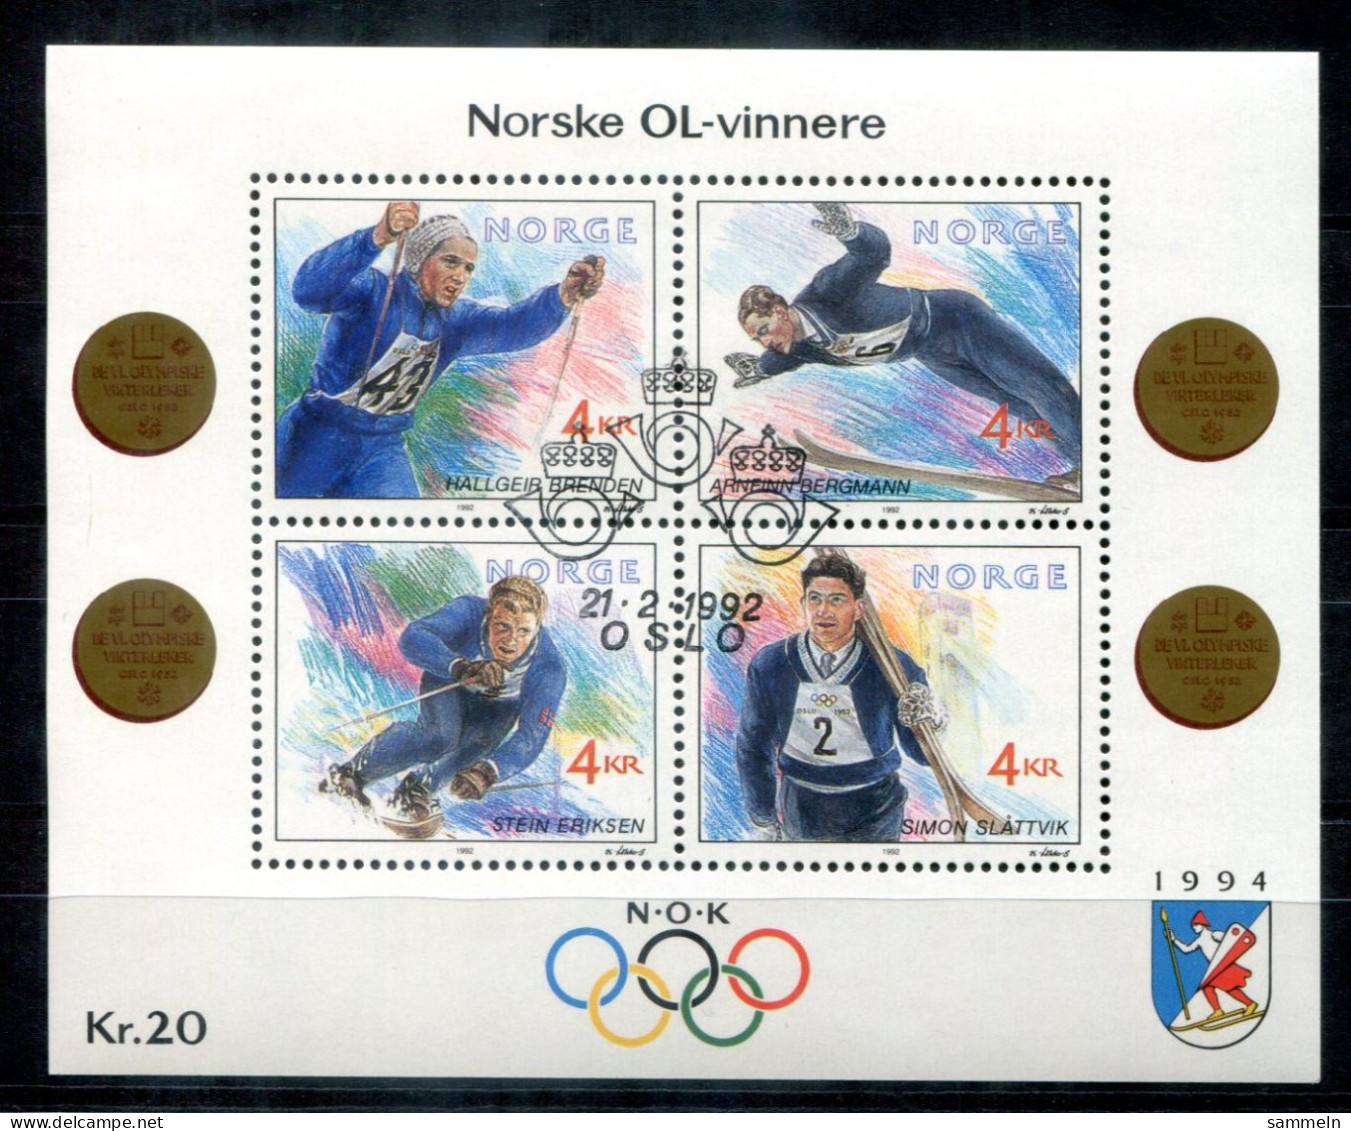 NORWEGEN - Block 17, Bl.17 Canc. - Olympiasieger, Olympic Champions Olympique - NORWAY / NORVÈGE - Hojas Bloque